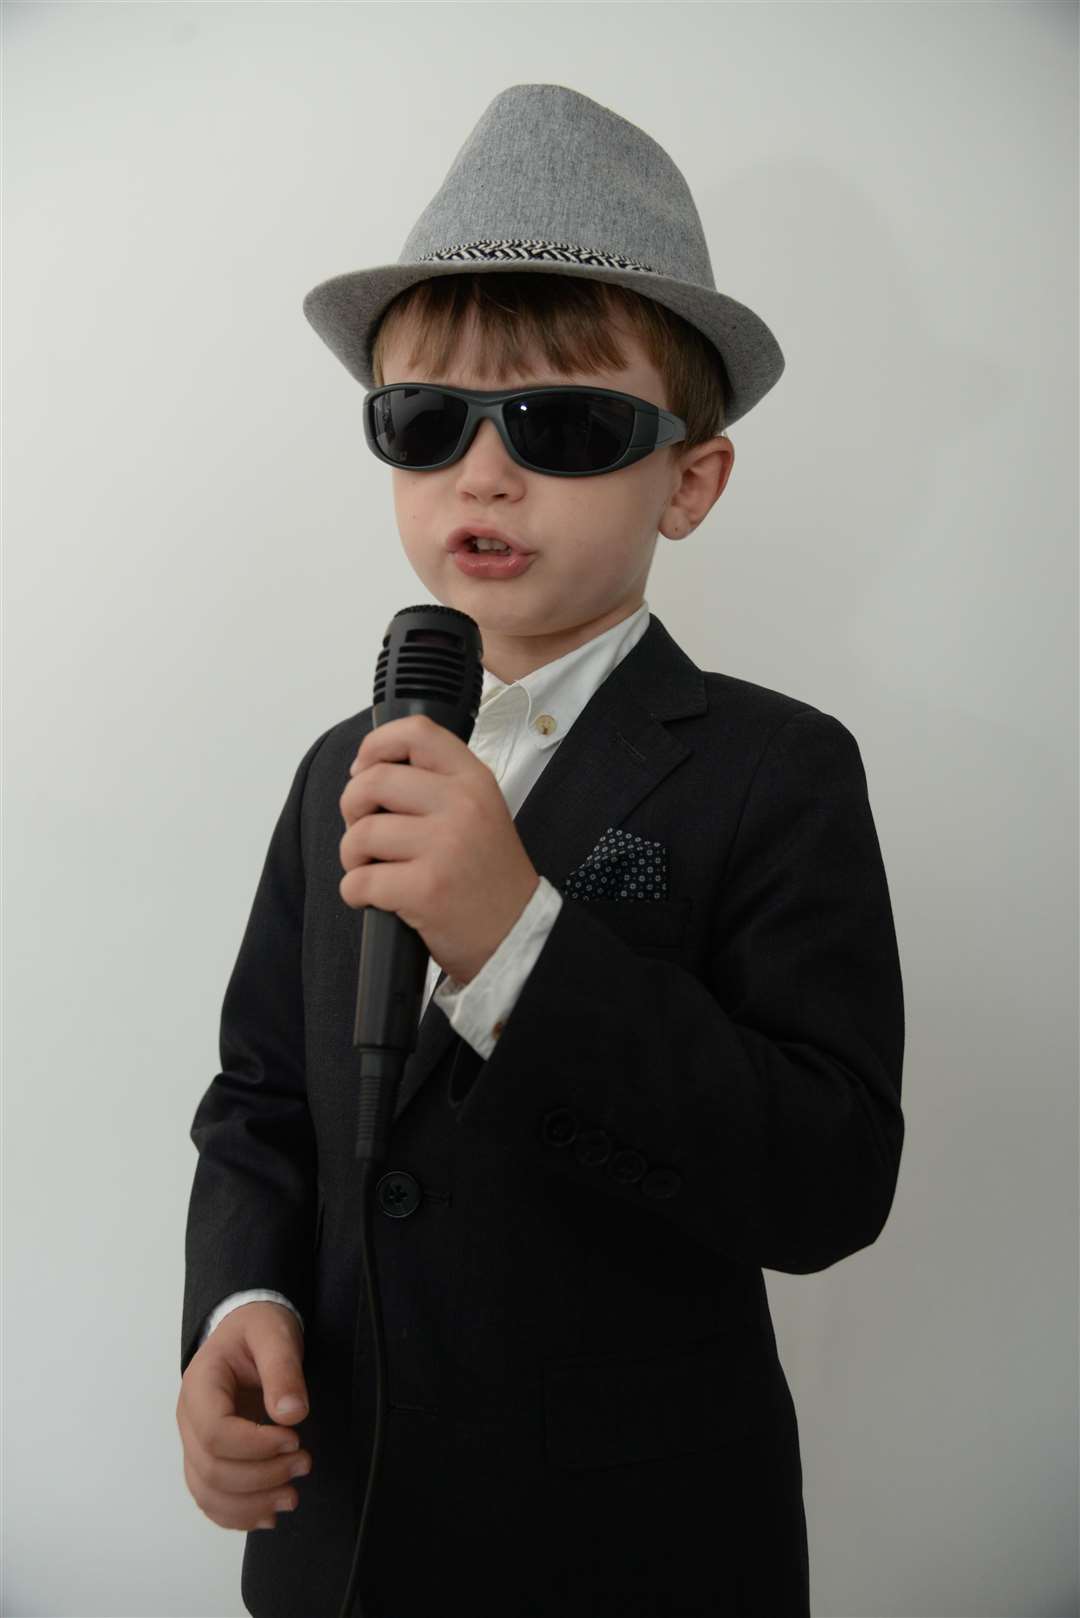 Five-year old Jimmy Aska Winch of Yalding as Sugg's from Madness. He has been entertaining audiences at rugby club events. Picture: Chris Davey... (4730980)